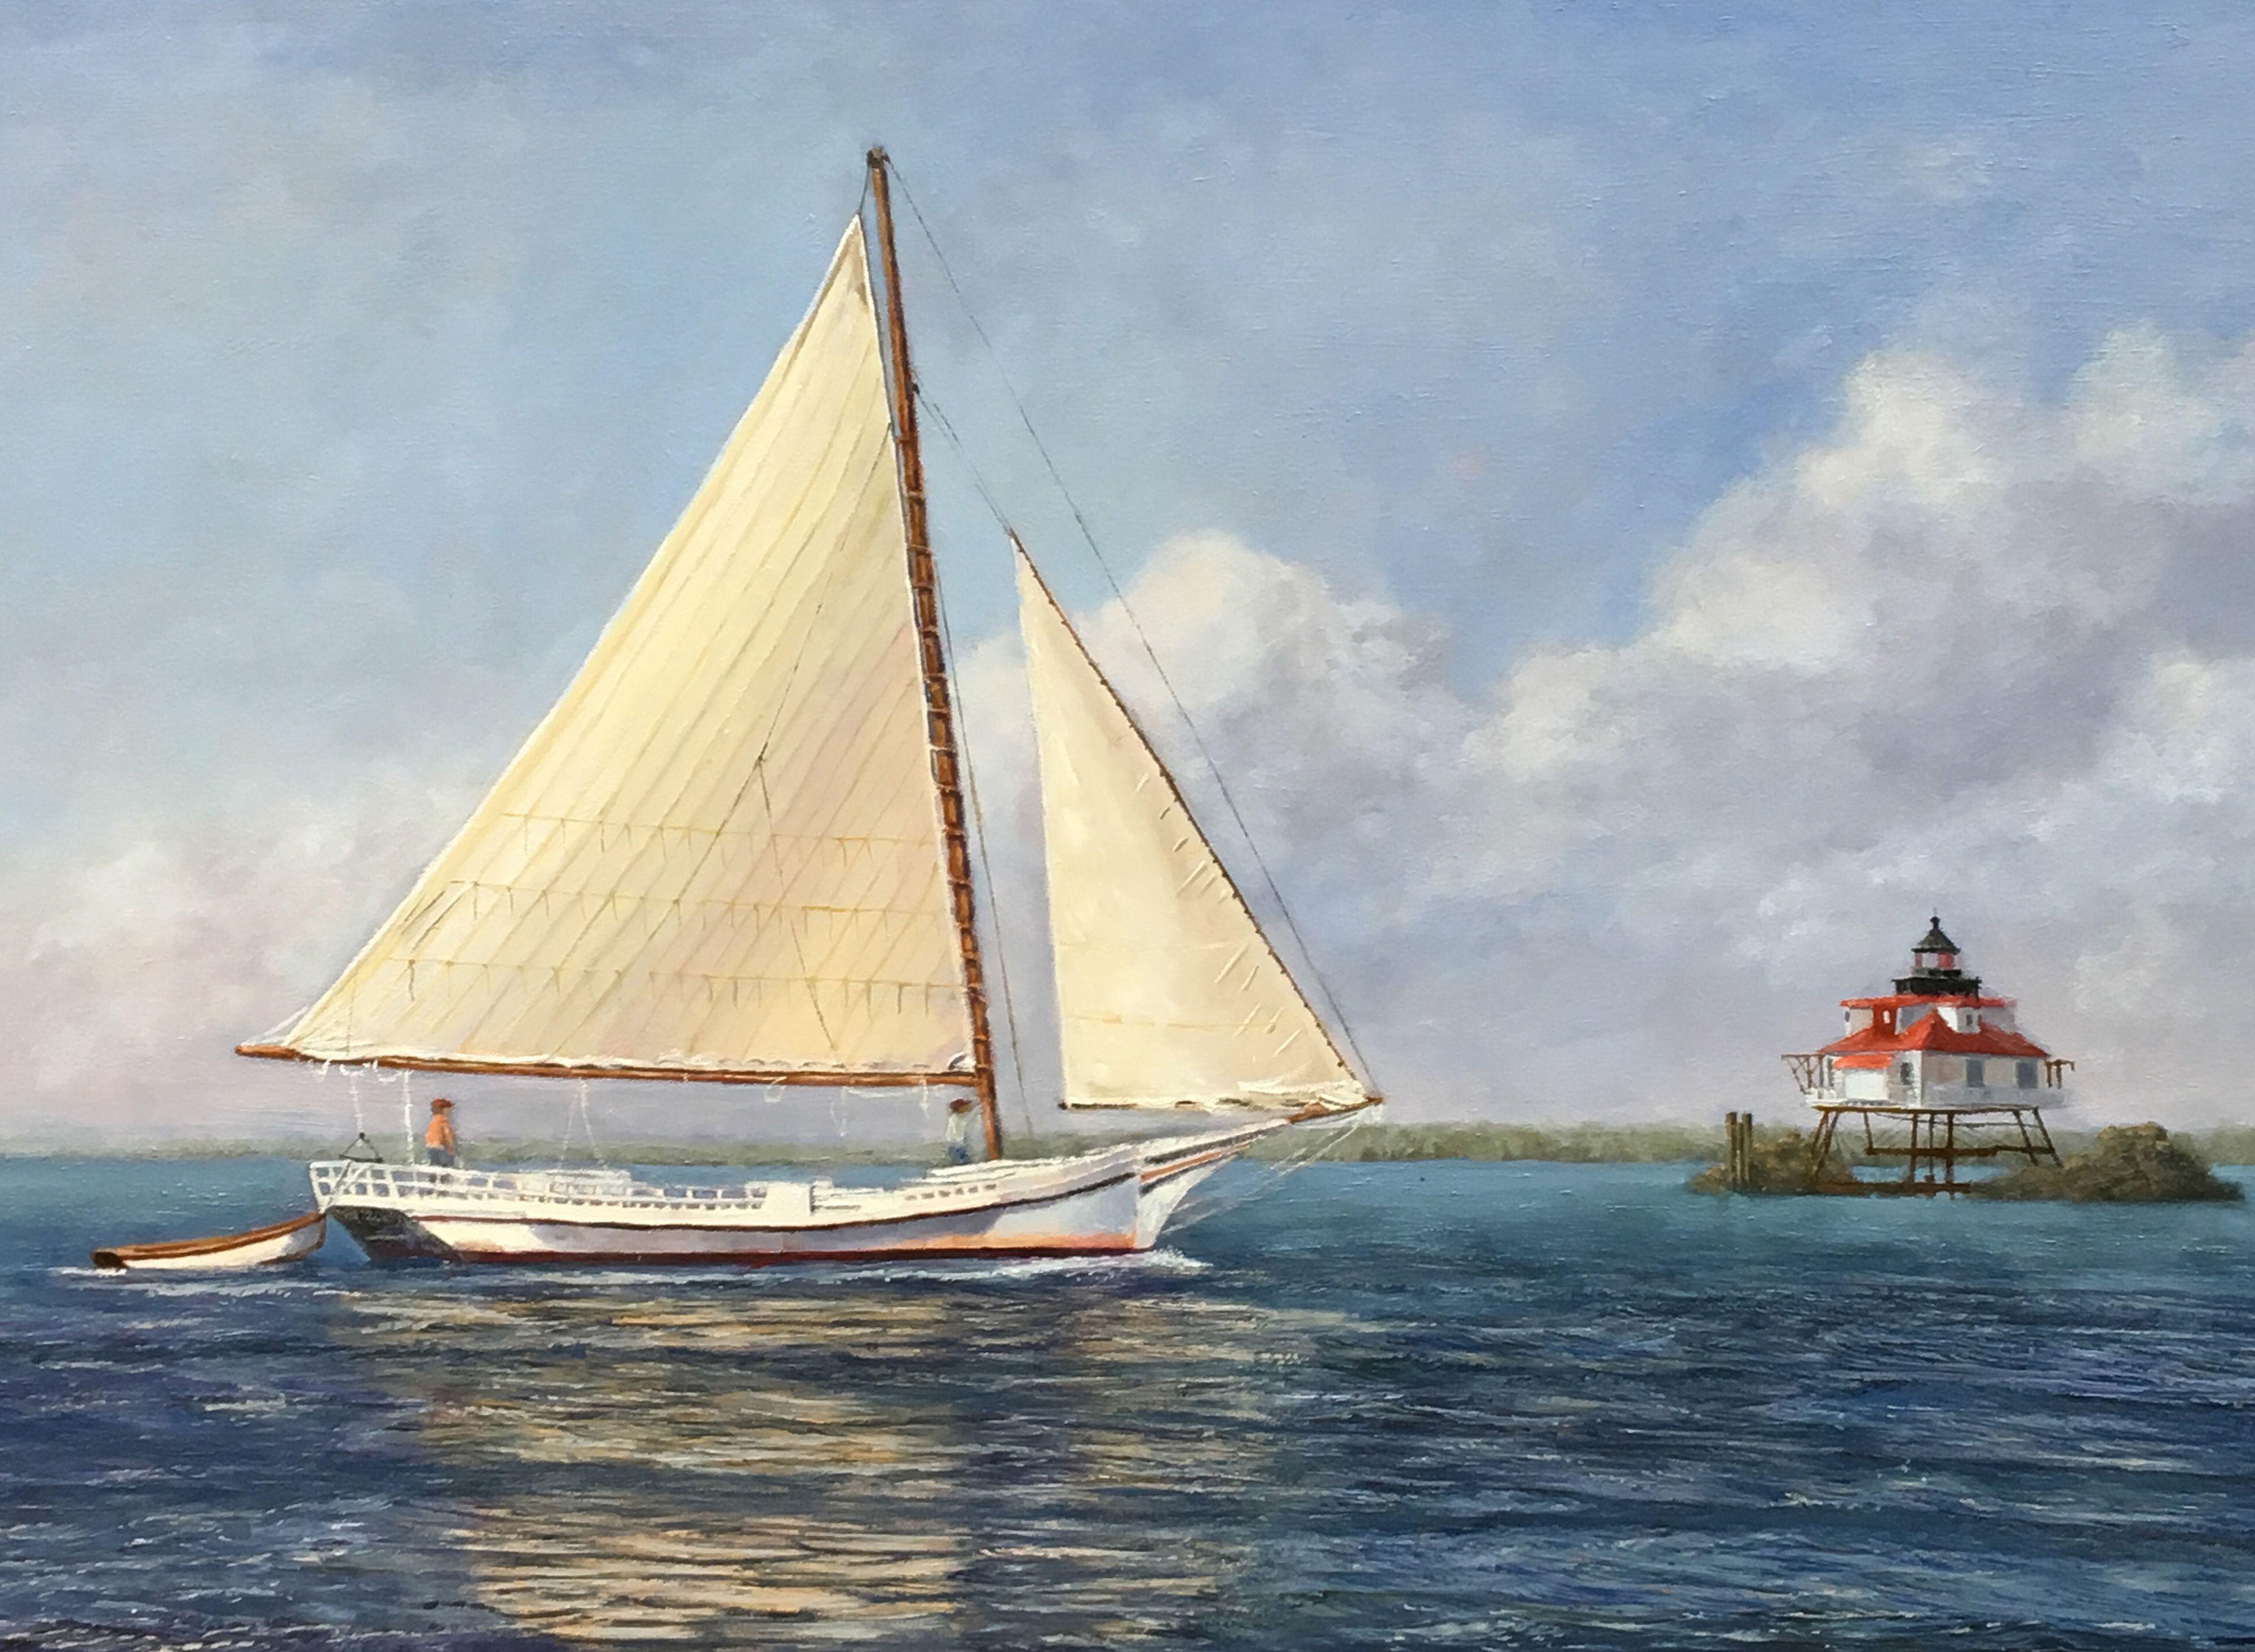 A Skipjack, an oyster boat of the Chesapeake Bay, sailing off the Thomas Point Lighthouse.    This painting was awarded the Katlan Family Seascape Award at the Allied Artists of America 2021 Juried National Exhibition at the Salmagundi Club.  ::